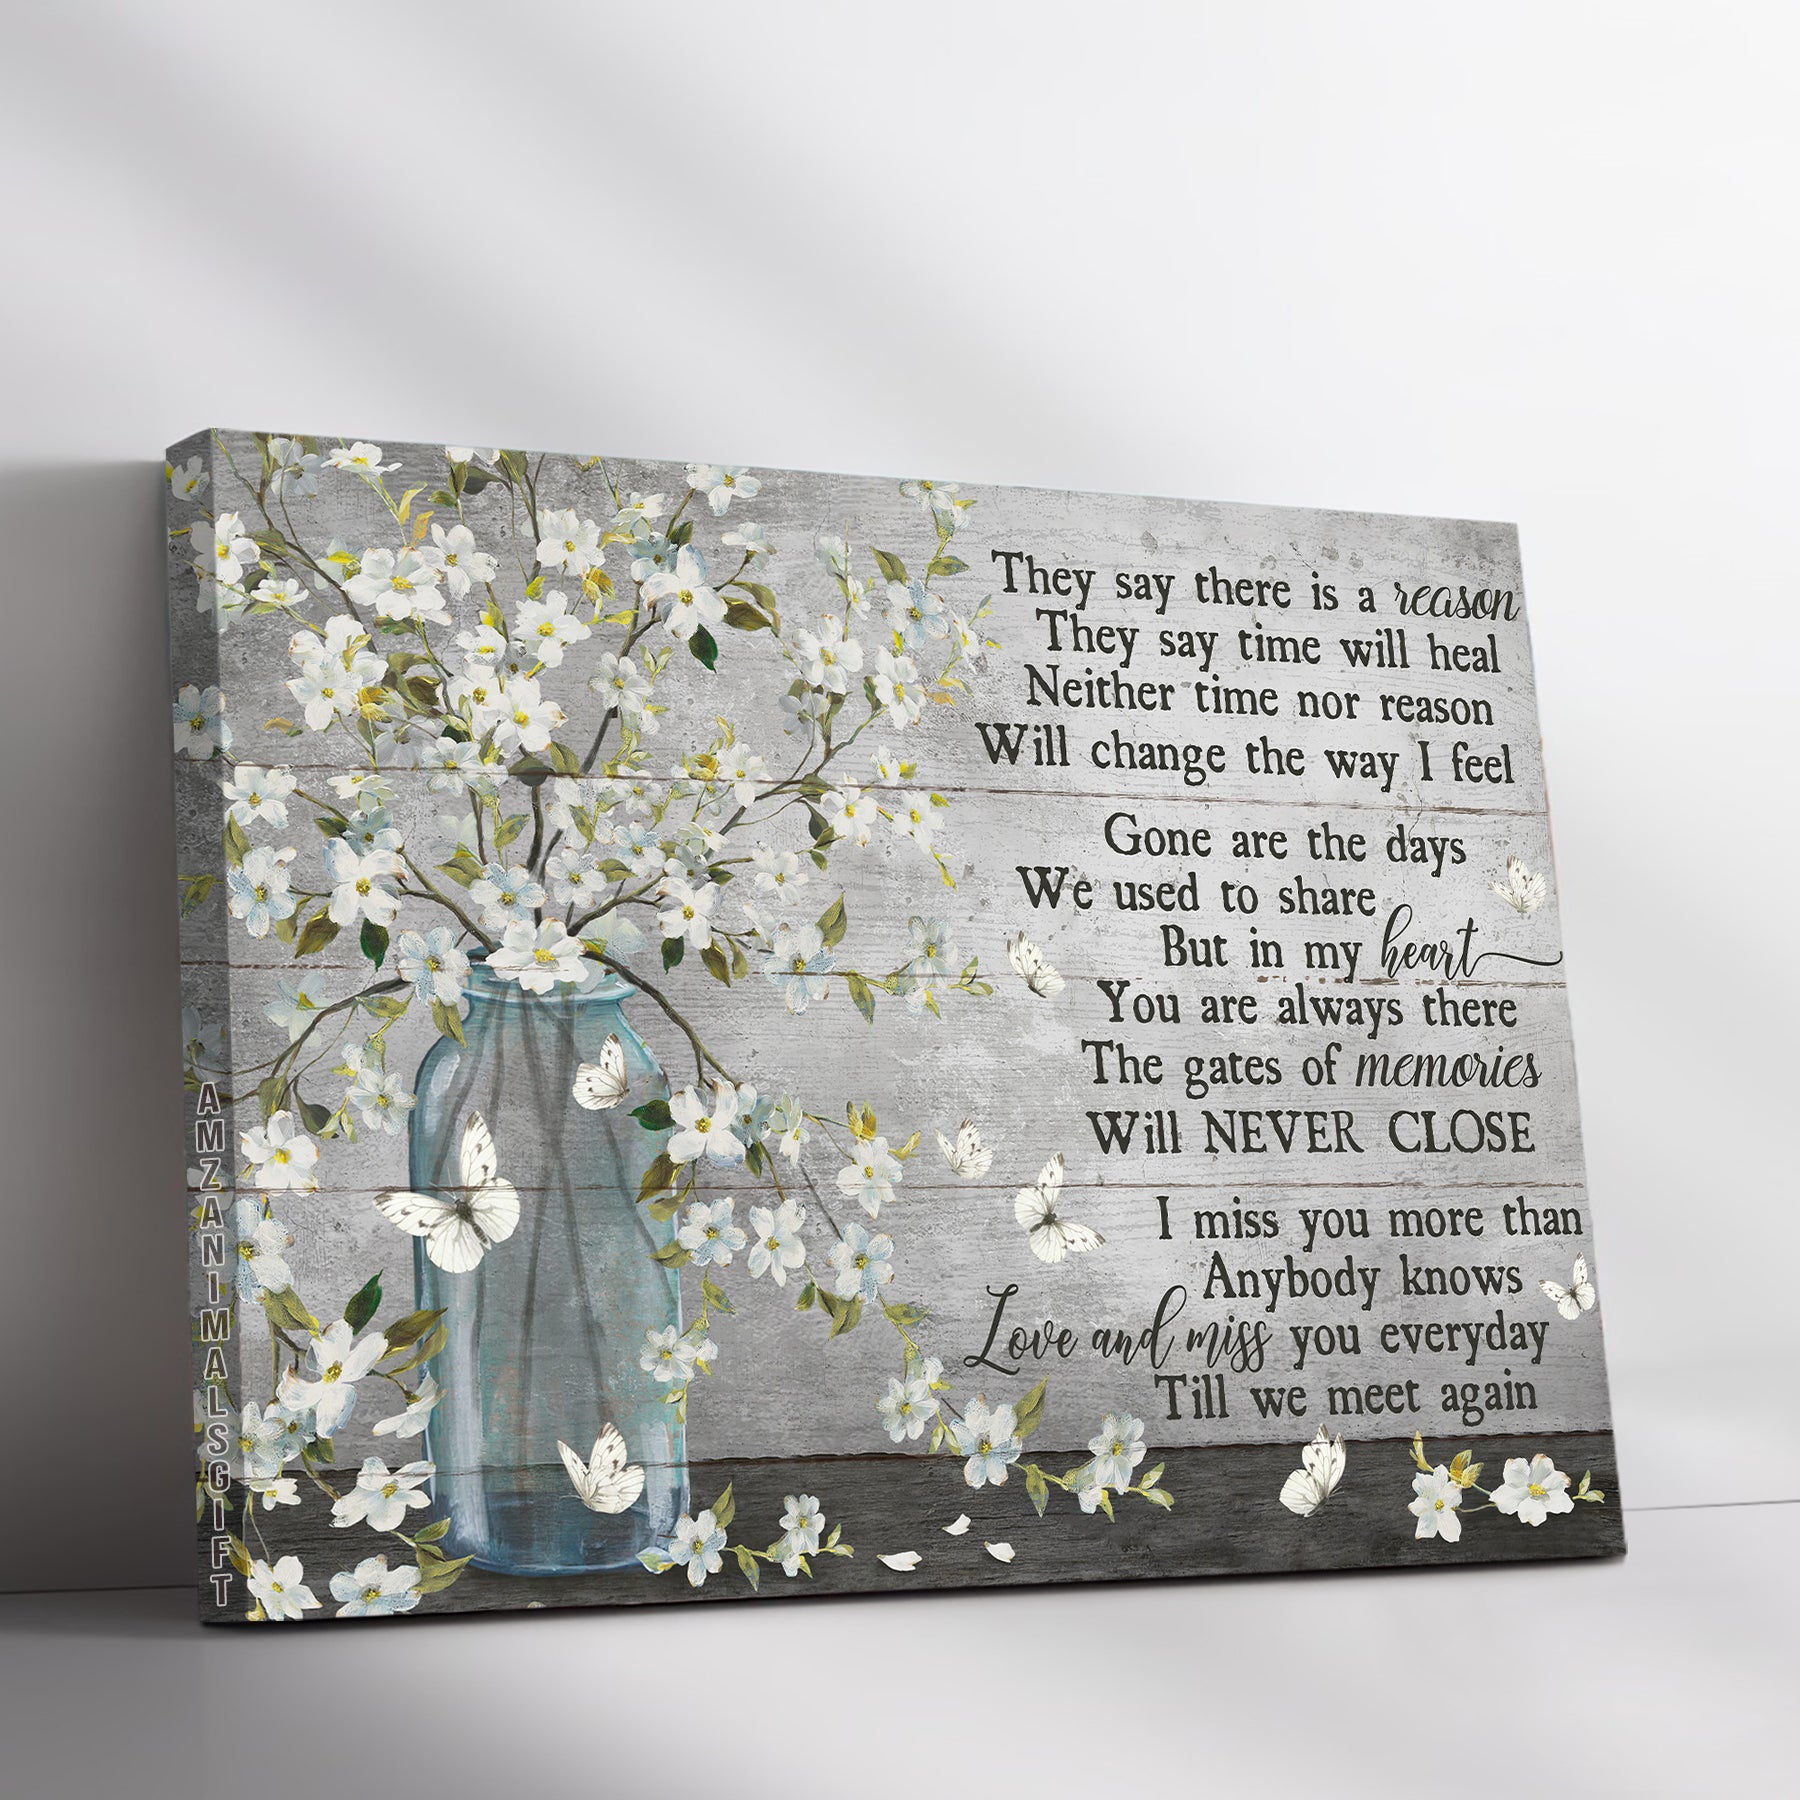 Memorial Premium Wrapped Landscape Canvas - Beautiful white Flower Vase, Subtle Background, They Say Time Will Heal - Perfect Gift For Members Family